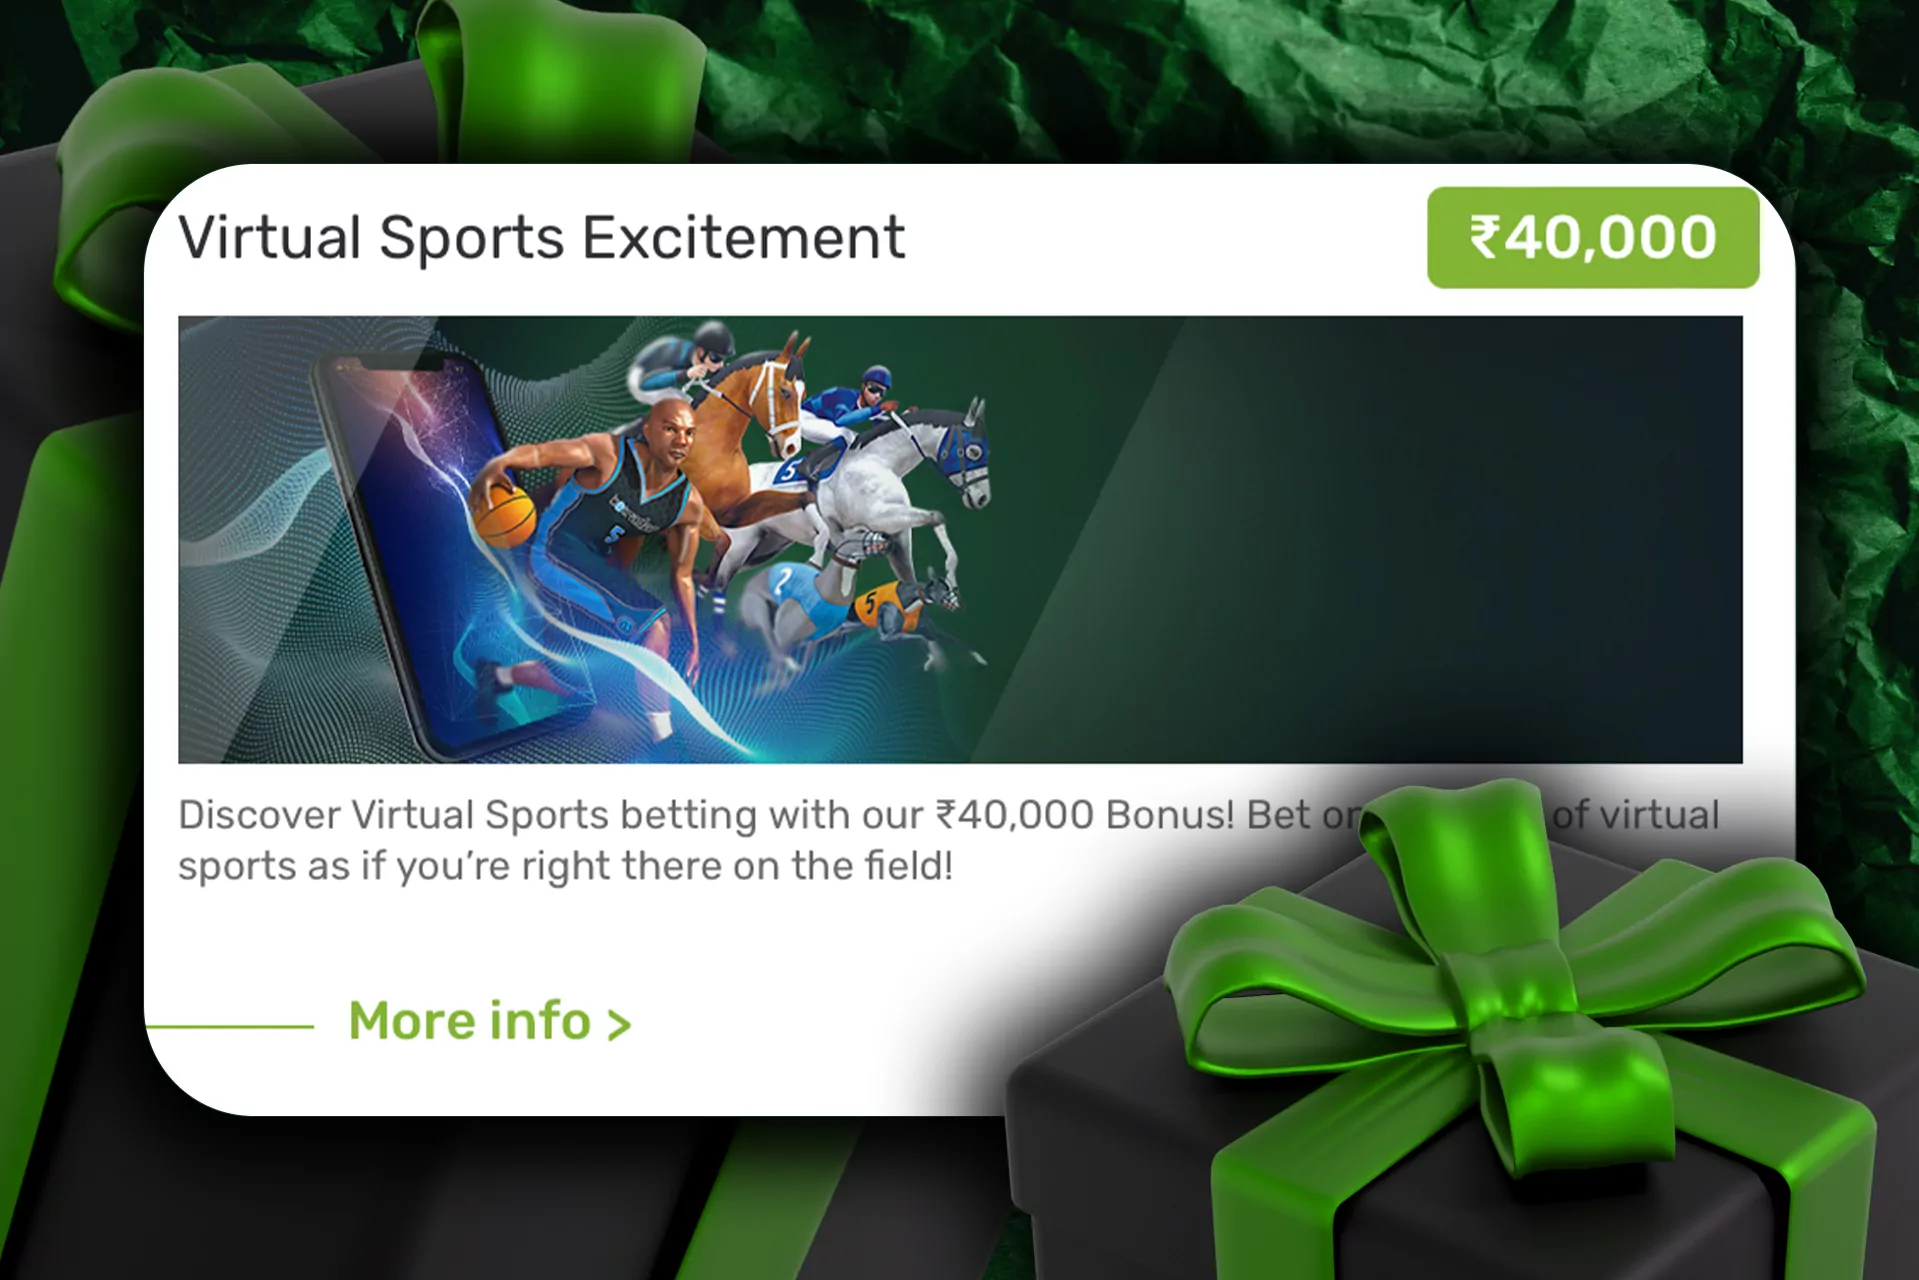 Bet on cybersports and get bonuses.